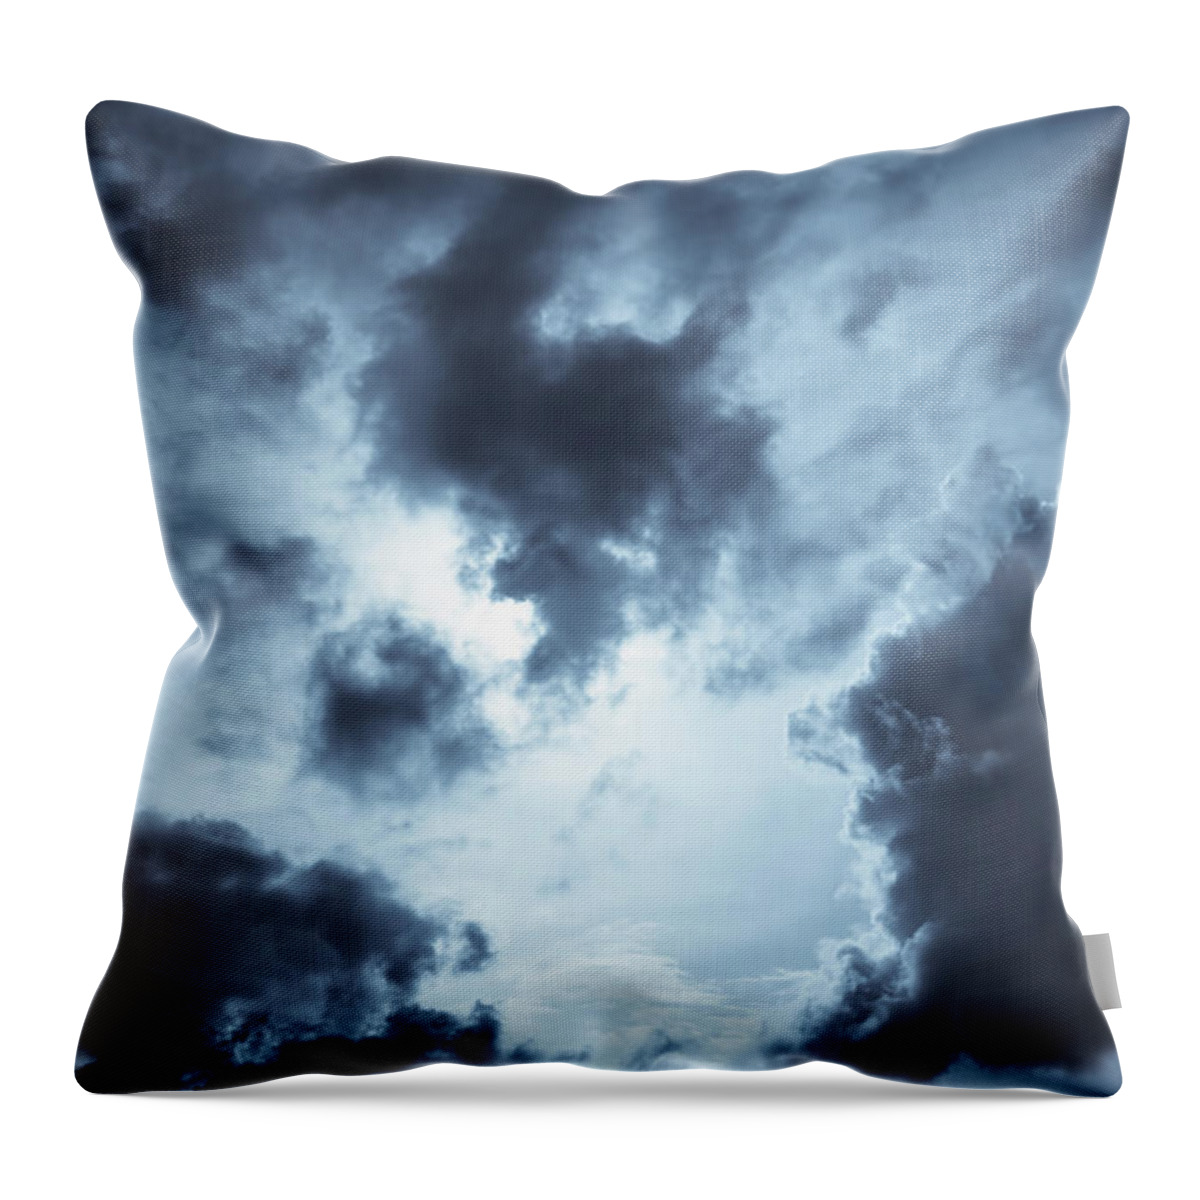 Underwater Throw Pillow featuring the photograph Dark Dramatic Clouds #1 by Elfinima